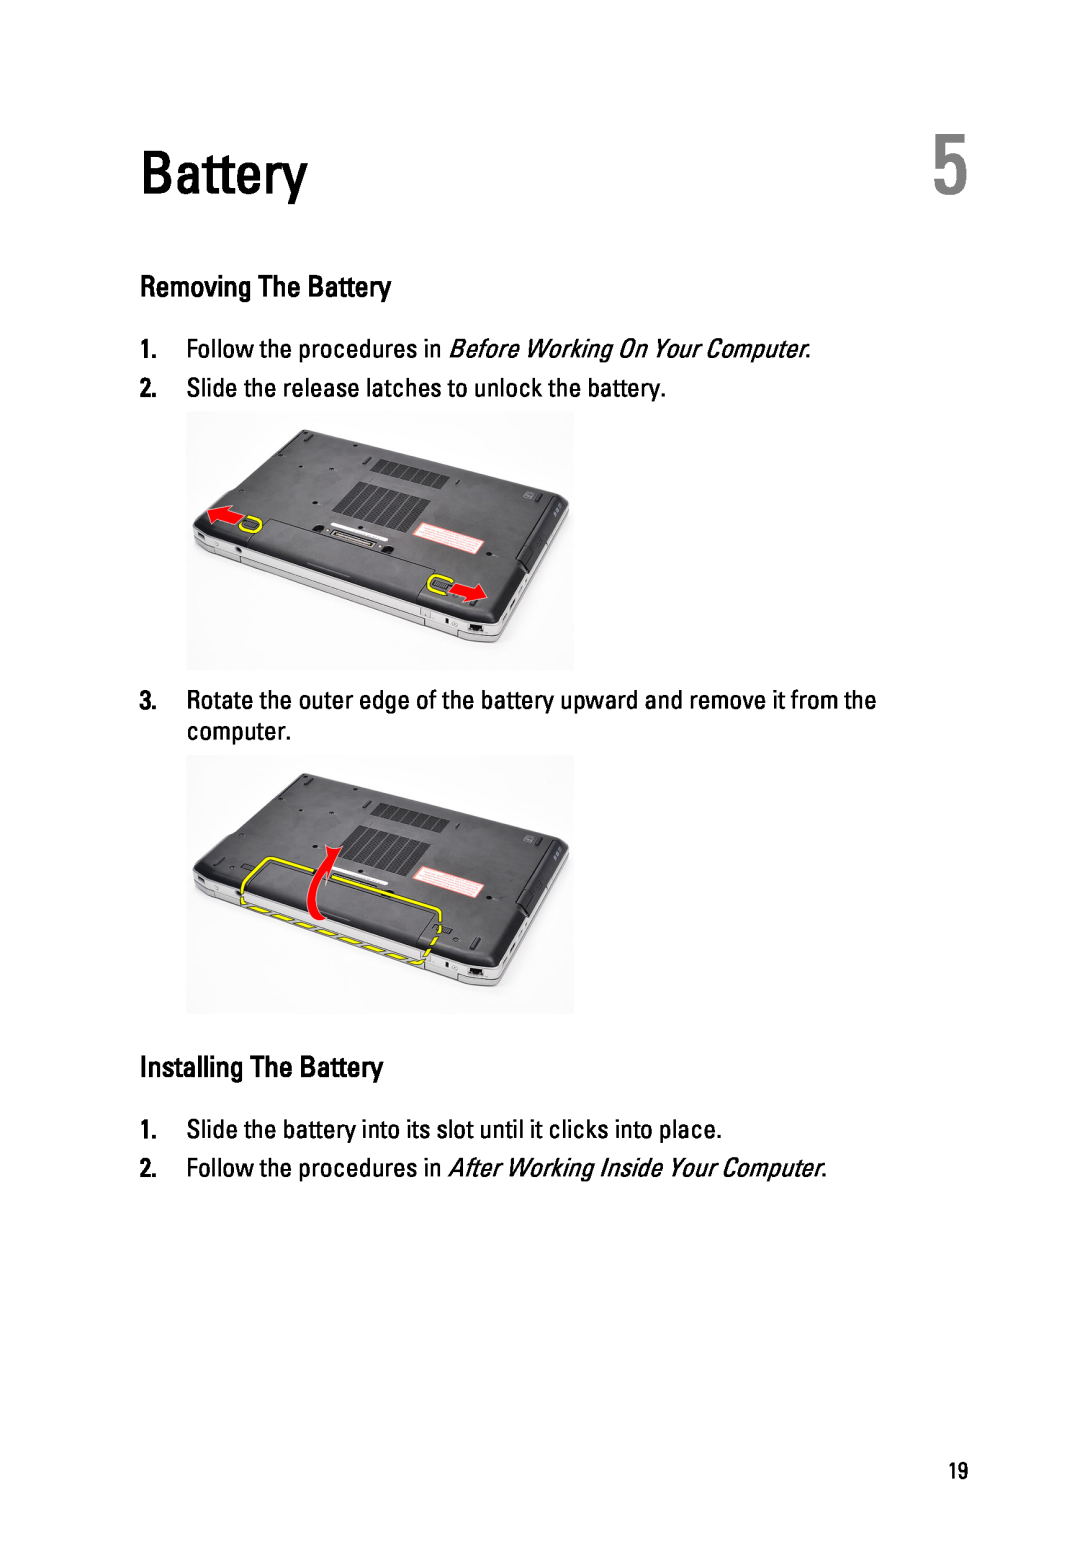 Dell E6520 owner manual Removing The Battery, Installing The Battery, Slide the release latches to unlock the battery 